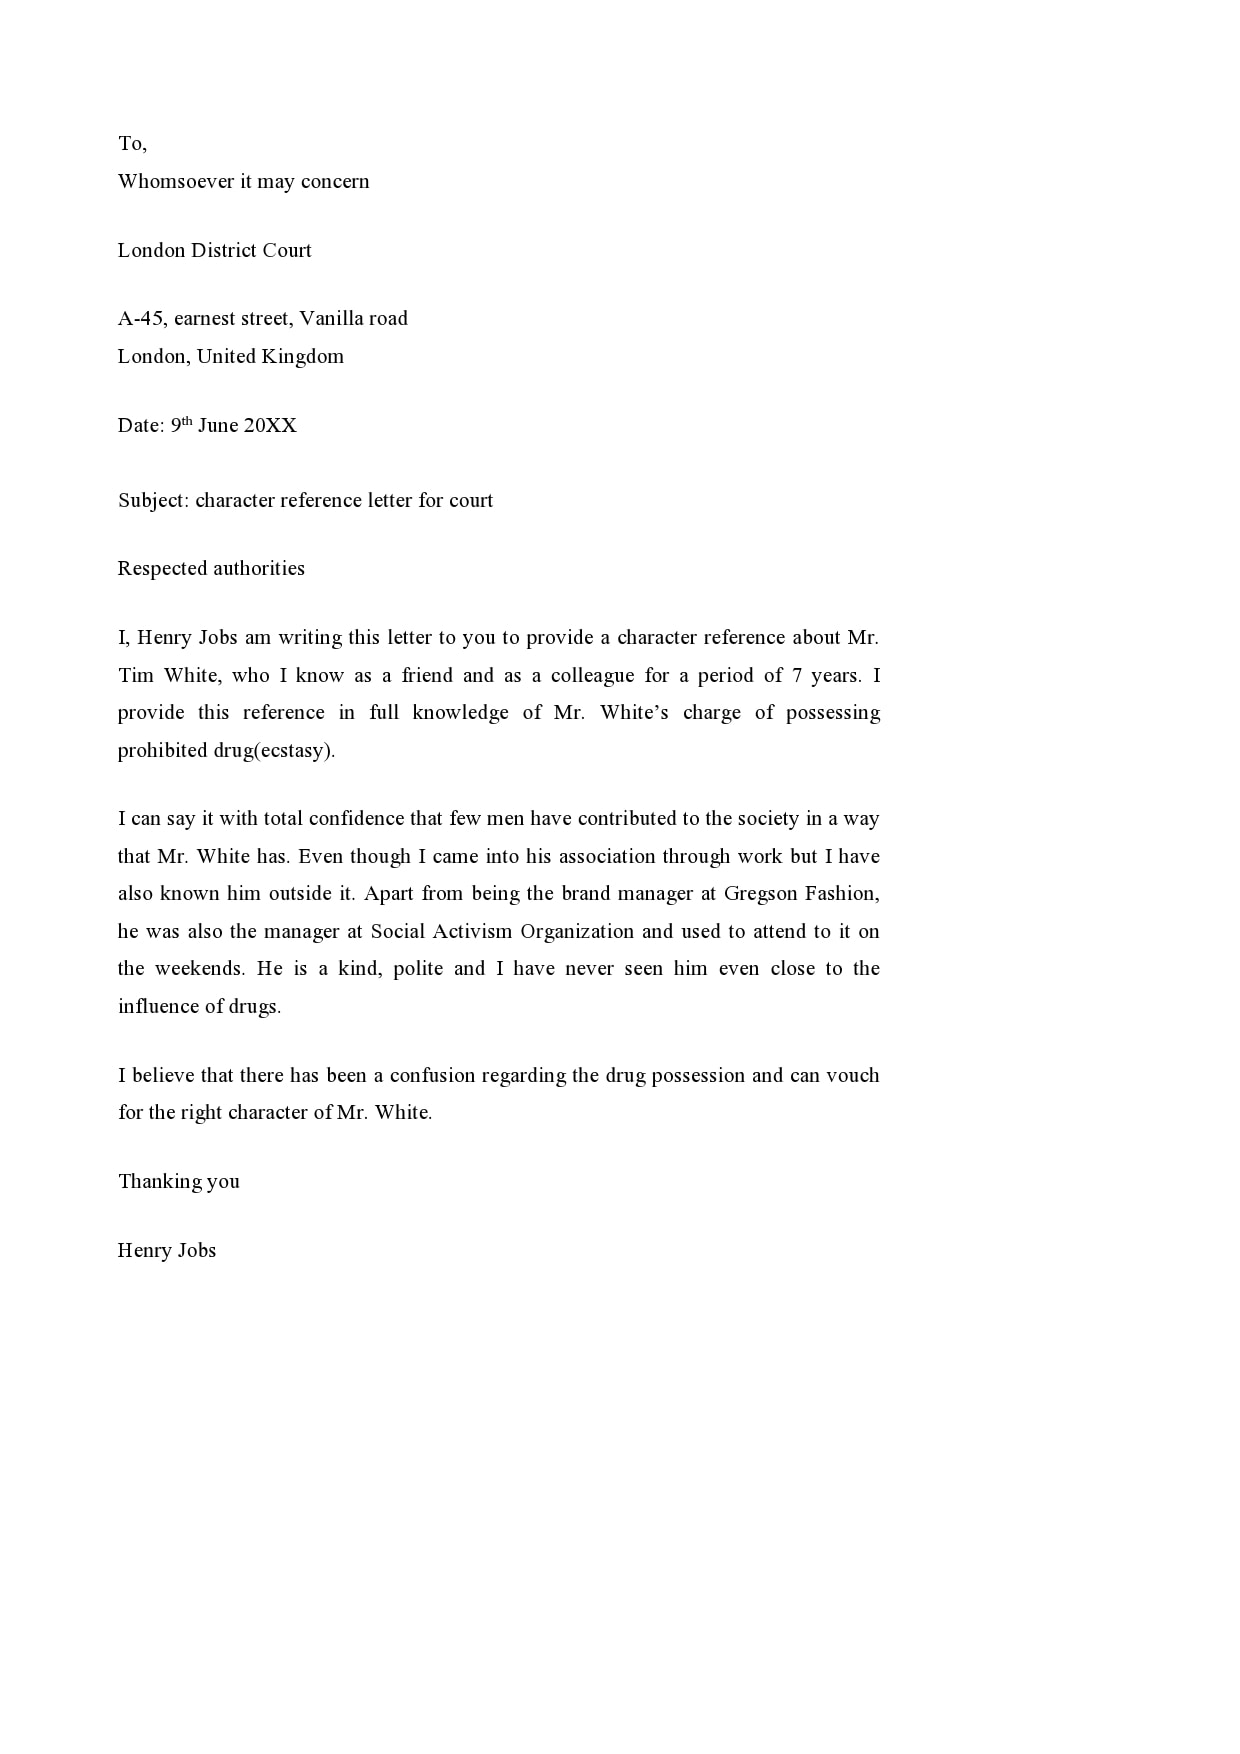 Employer Reference Letter Template from templatearchive.com